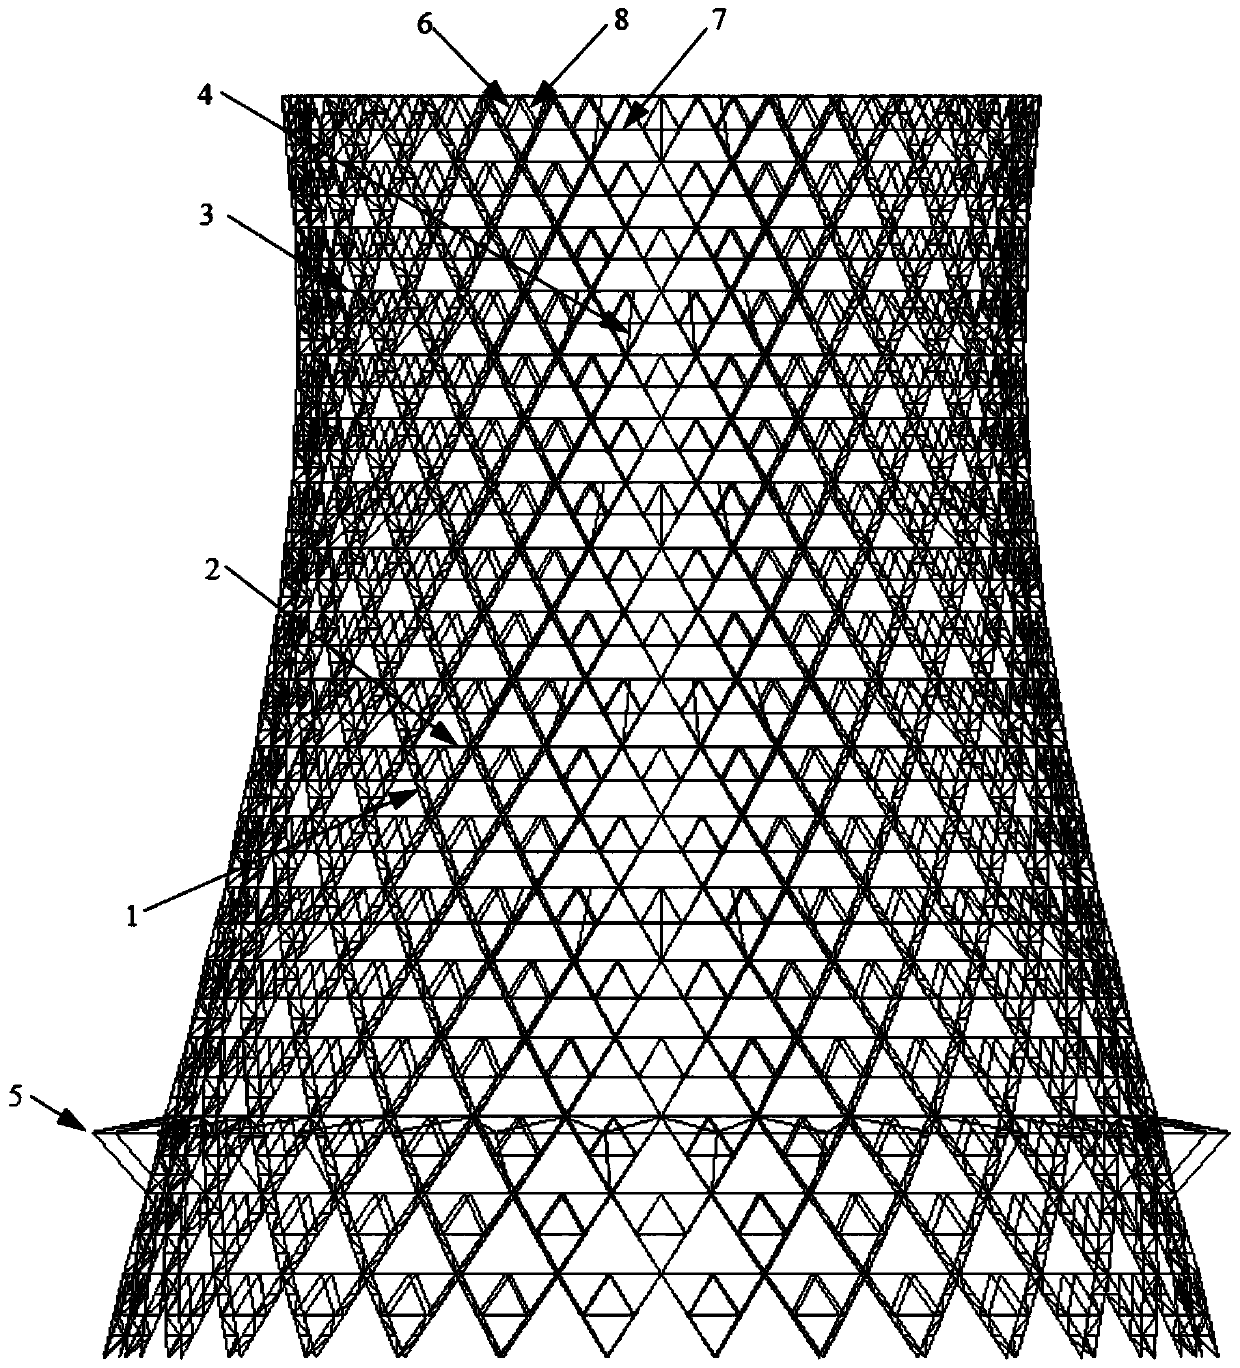 Steel structure cooling tower with a cross plane truss system